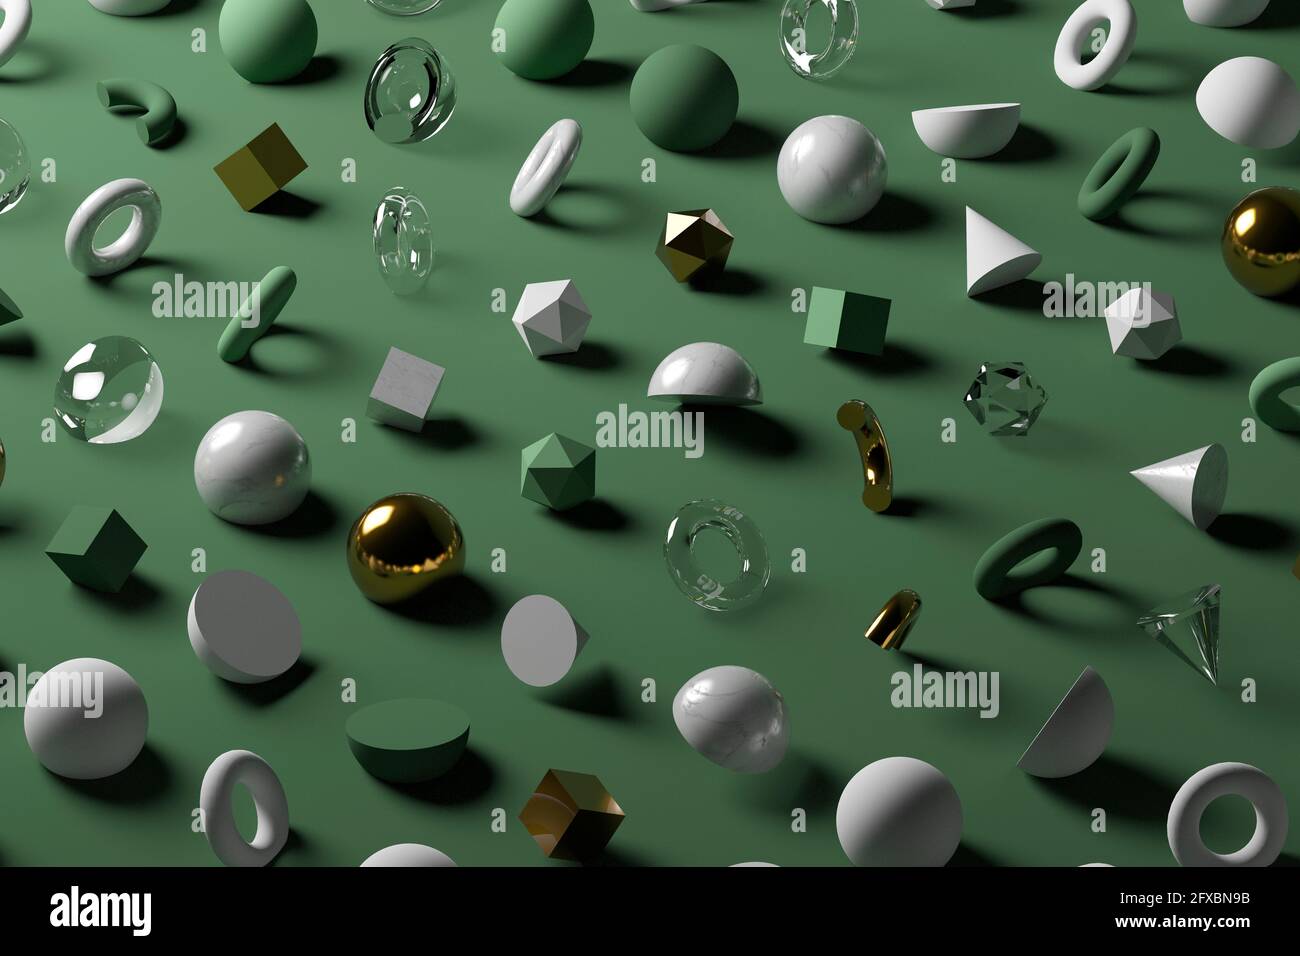 Gold, glass, marble geometric shapes against pastel green background Stock Photo